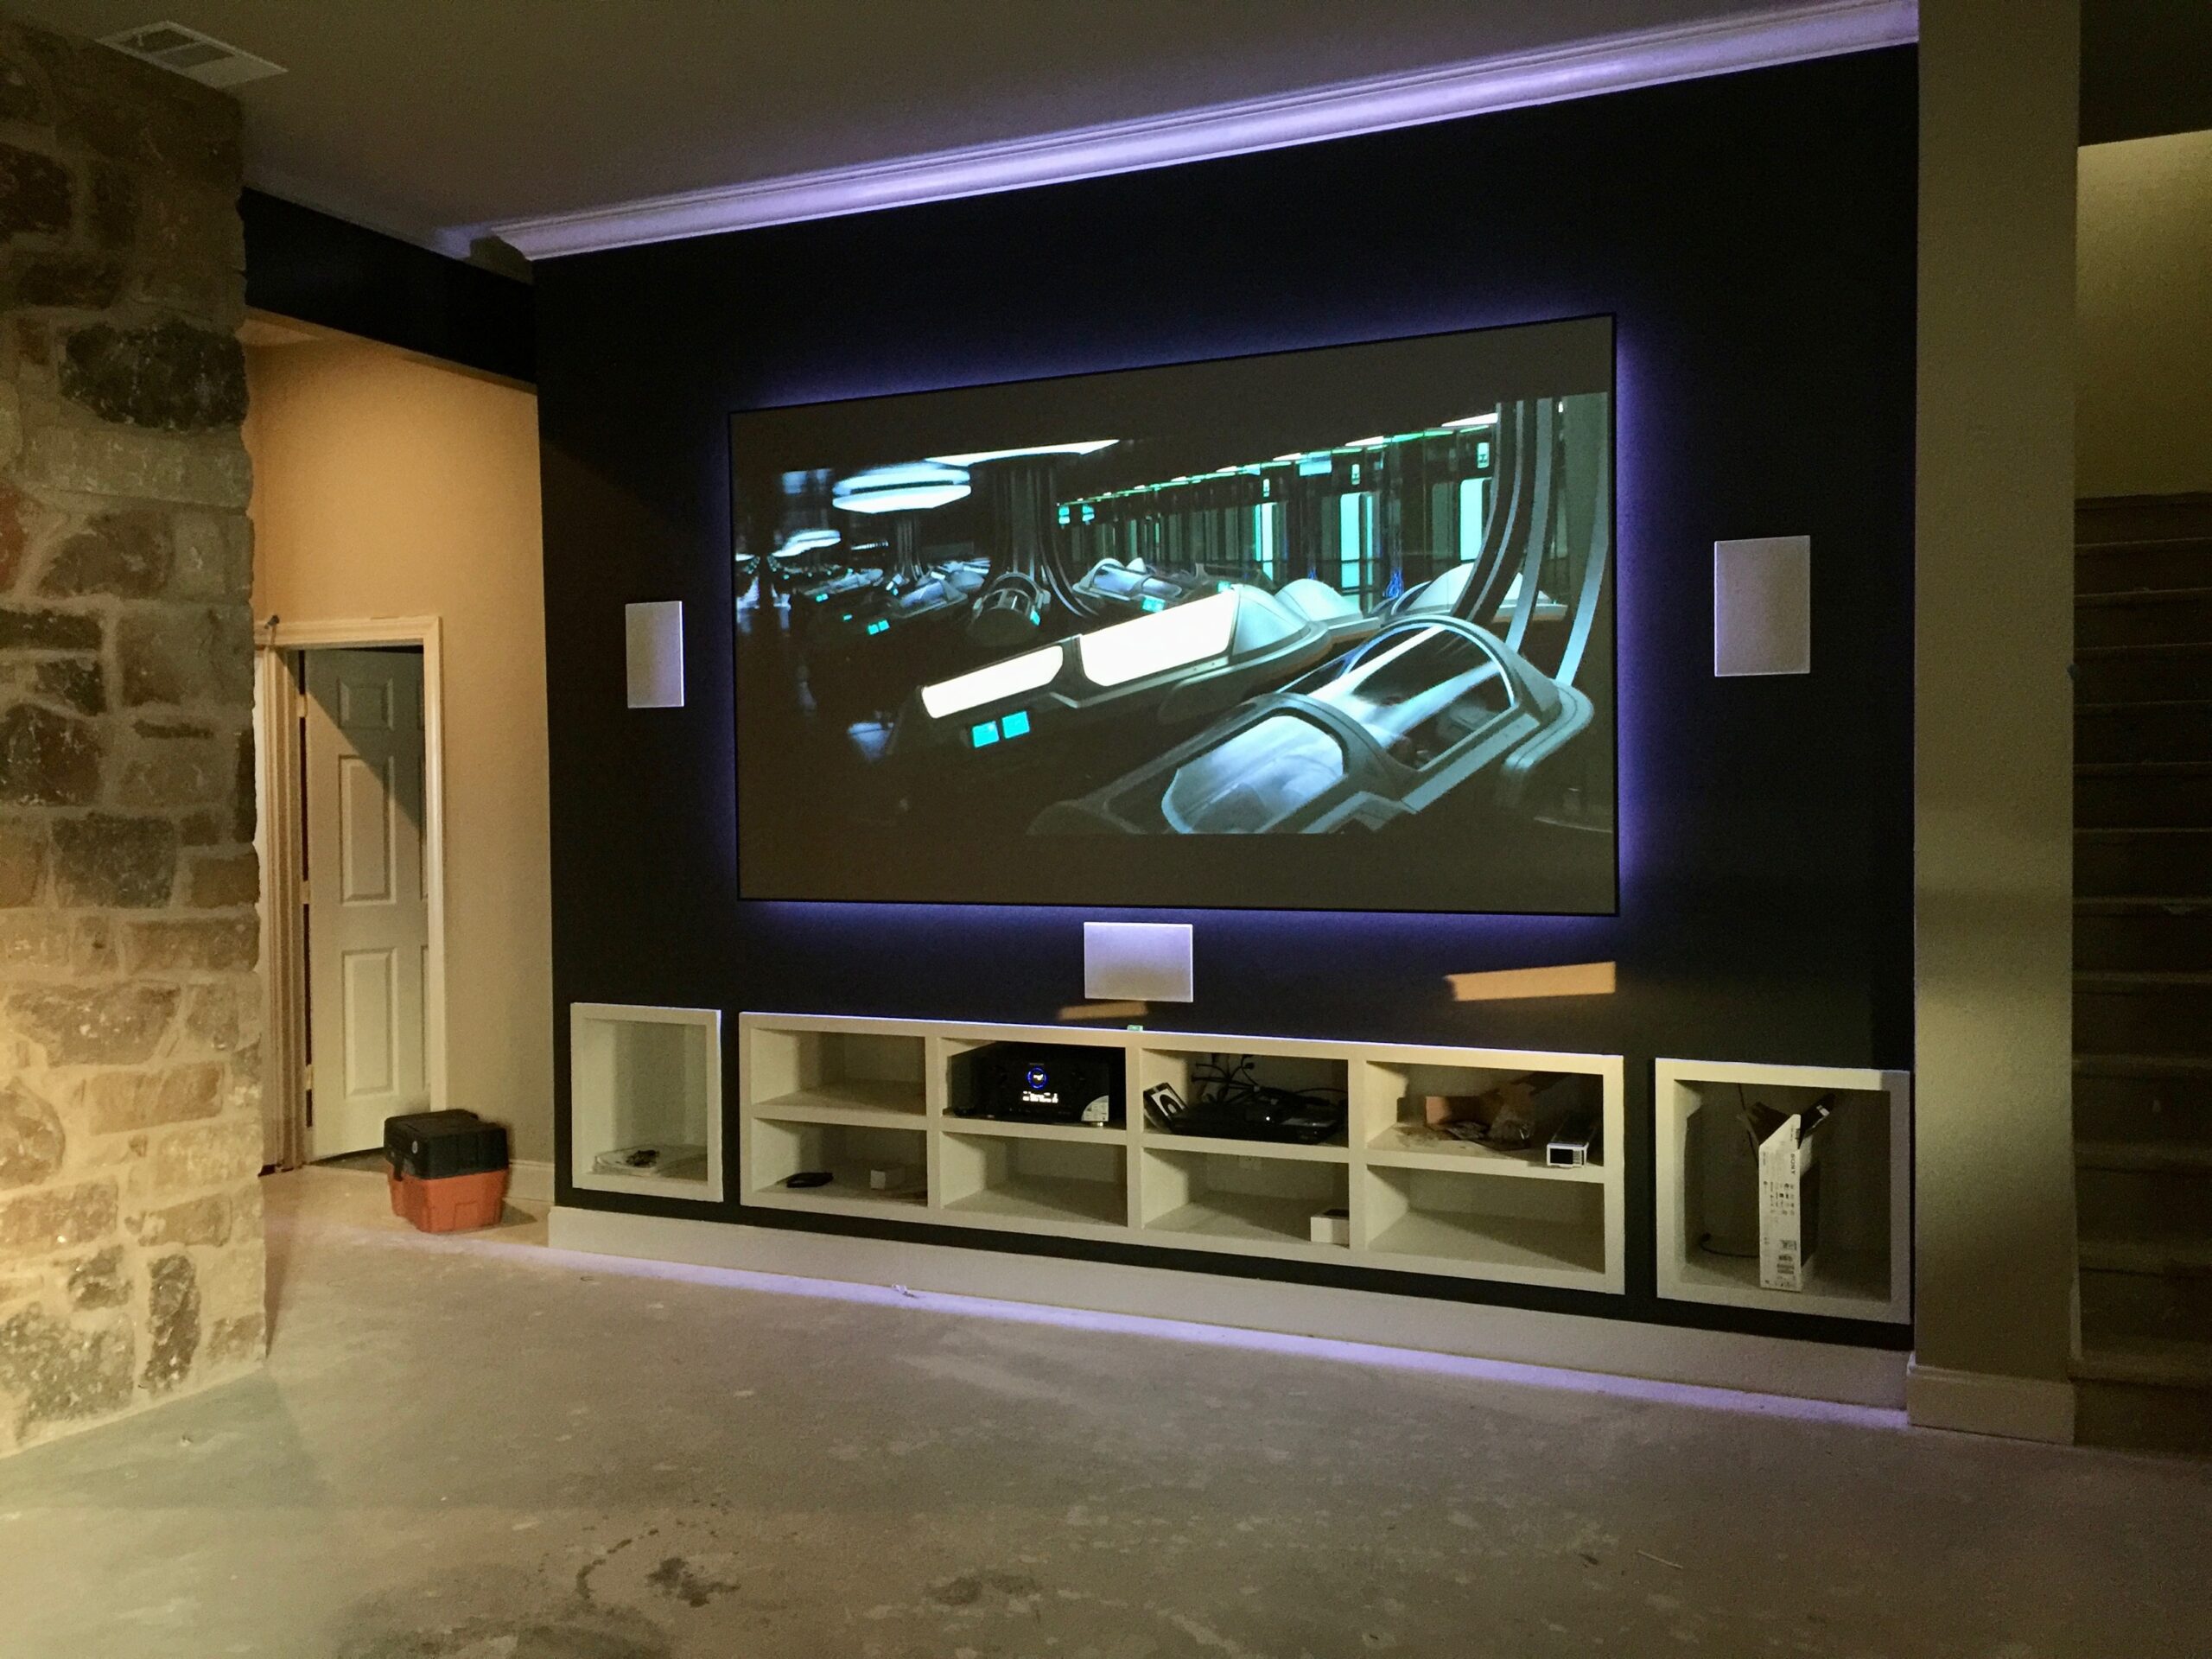 Home theater room with short throw laser projection, hidden pristine sound system and custom theater lighting